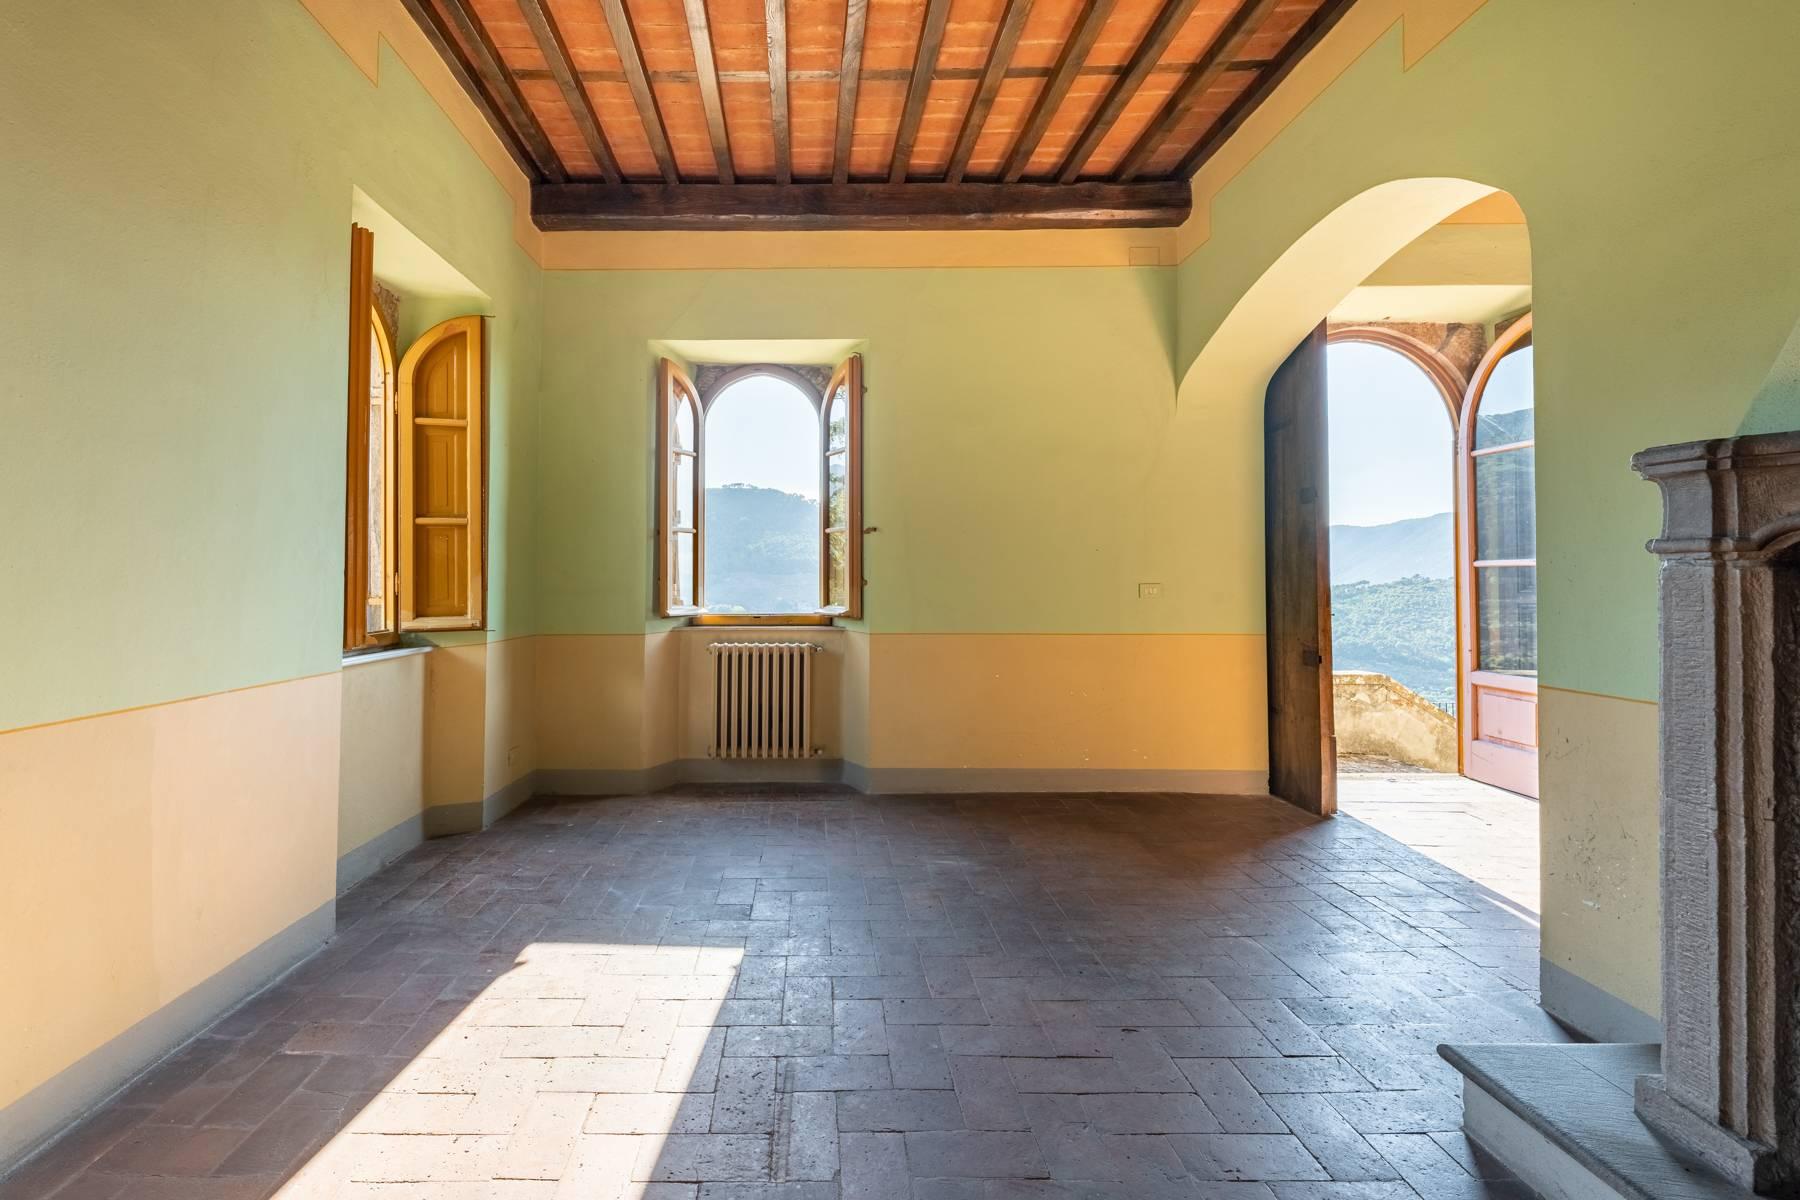 Superb villa with breathtaking views of the Lucca countryside - 13